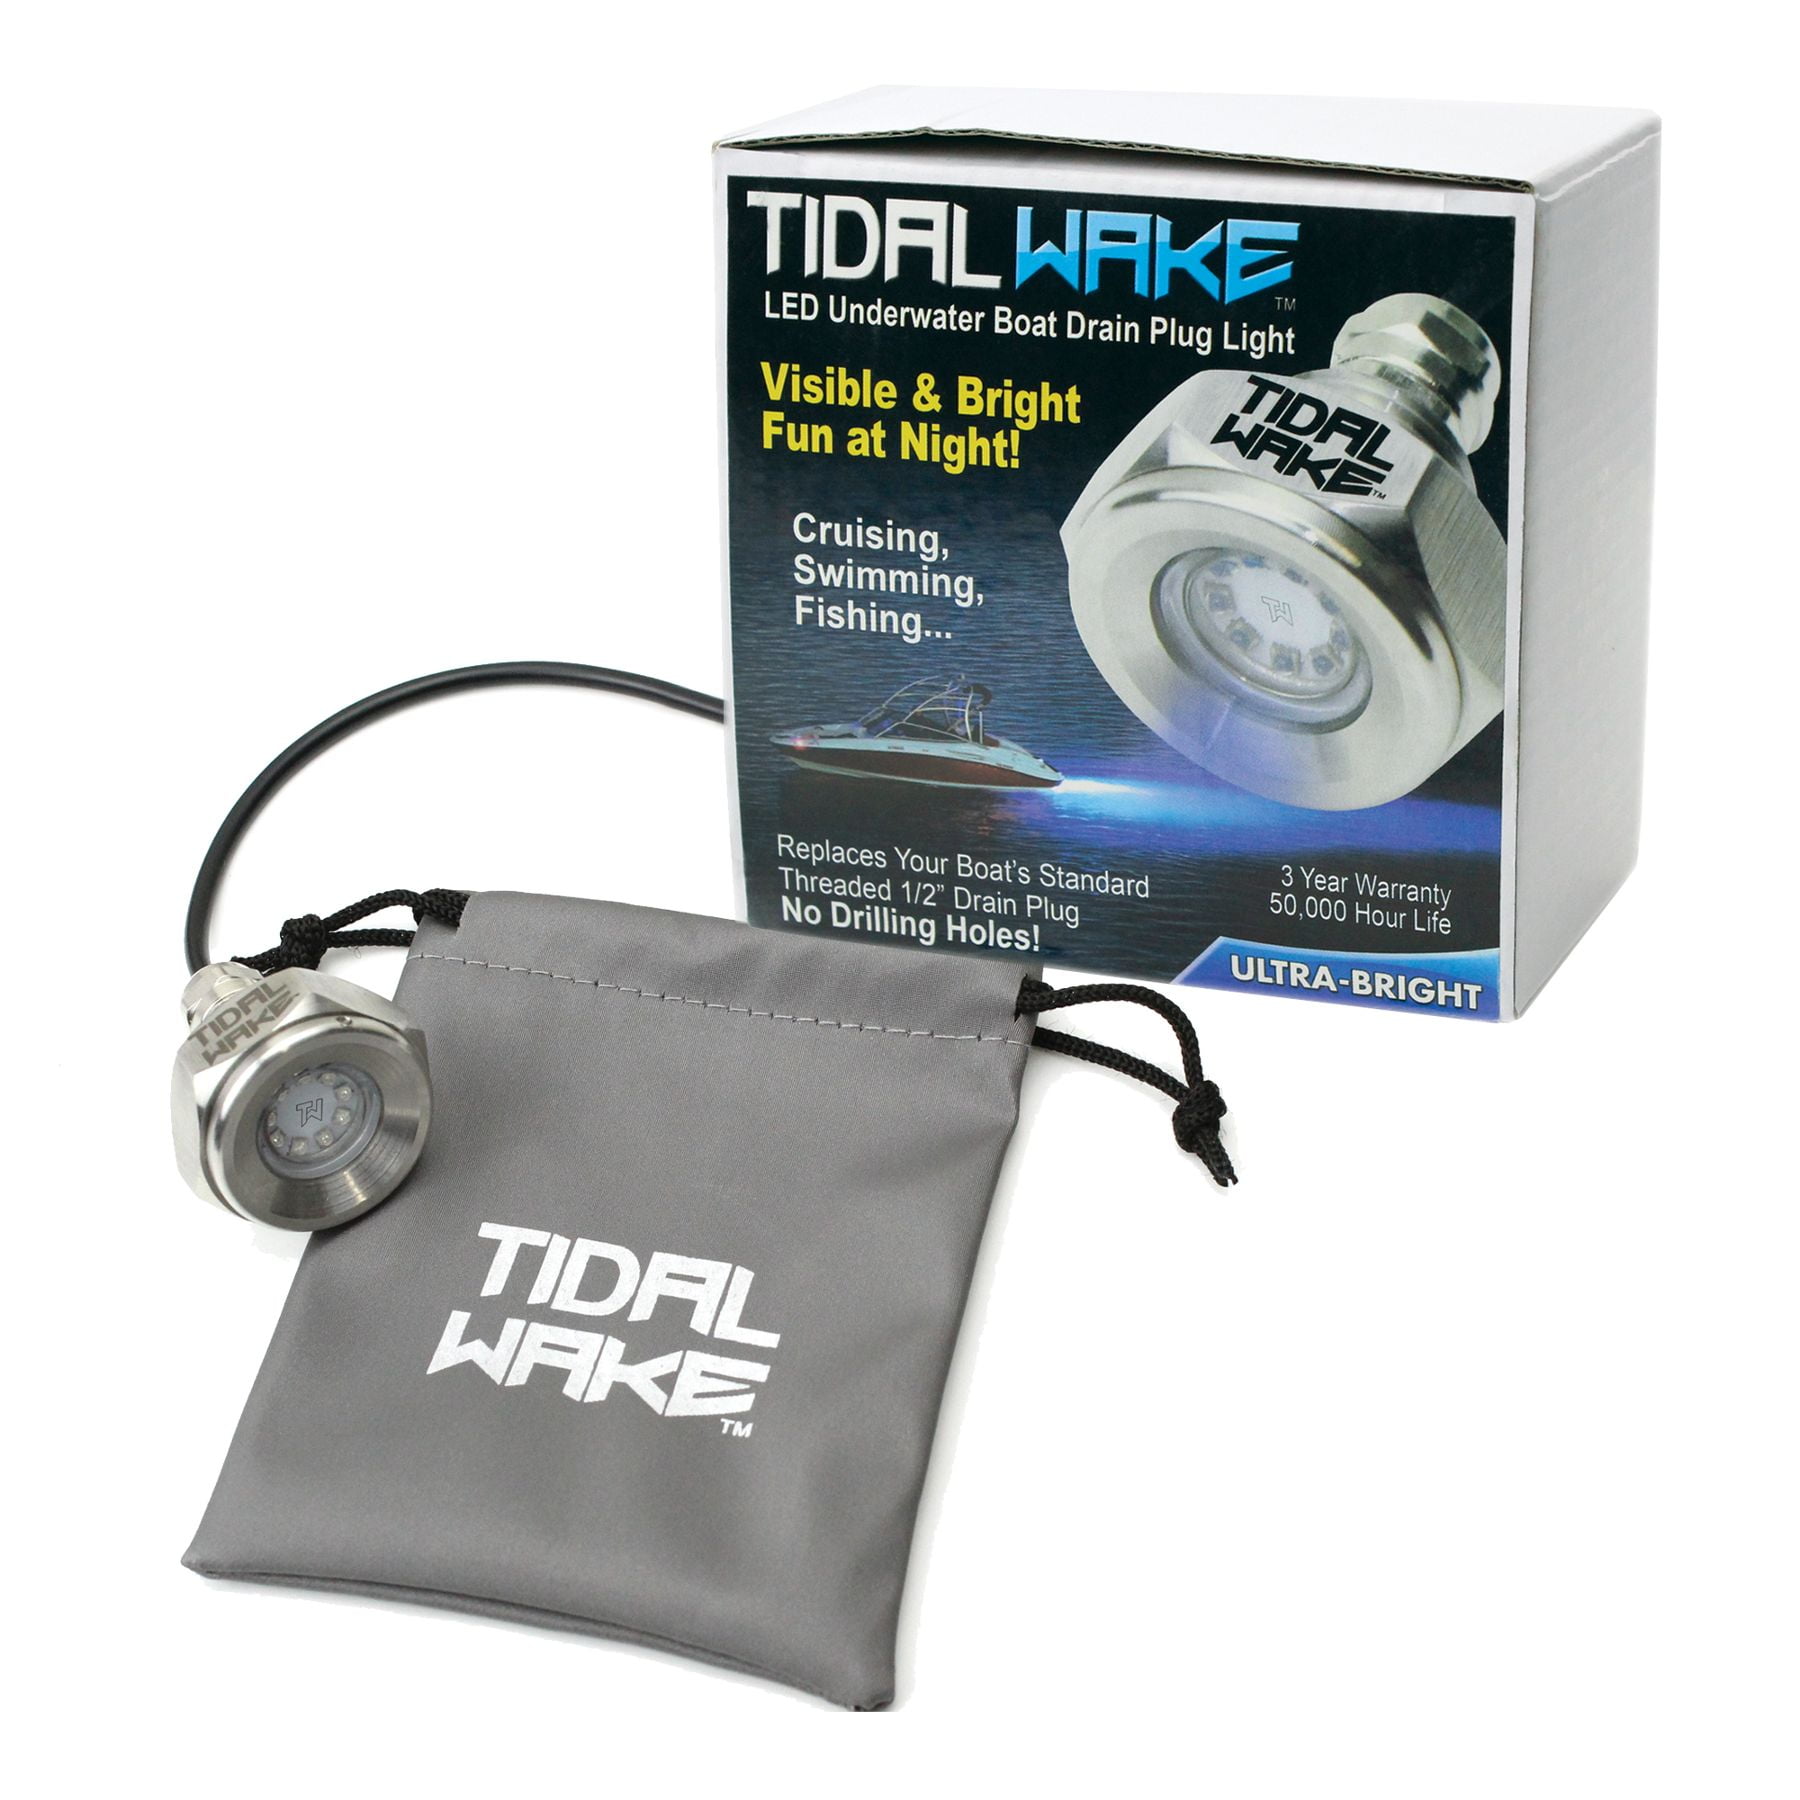 Add Ultra-Bright Underwater Lighting to Your Boat in 5 Minutes No Wiring Required No Holes to Drill 3 Years Warrant Tidal Wake Plug N Play Underwater LED Boat Drain Plug Light 